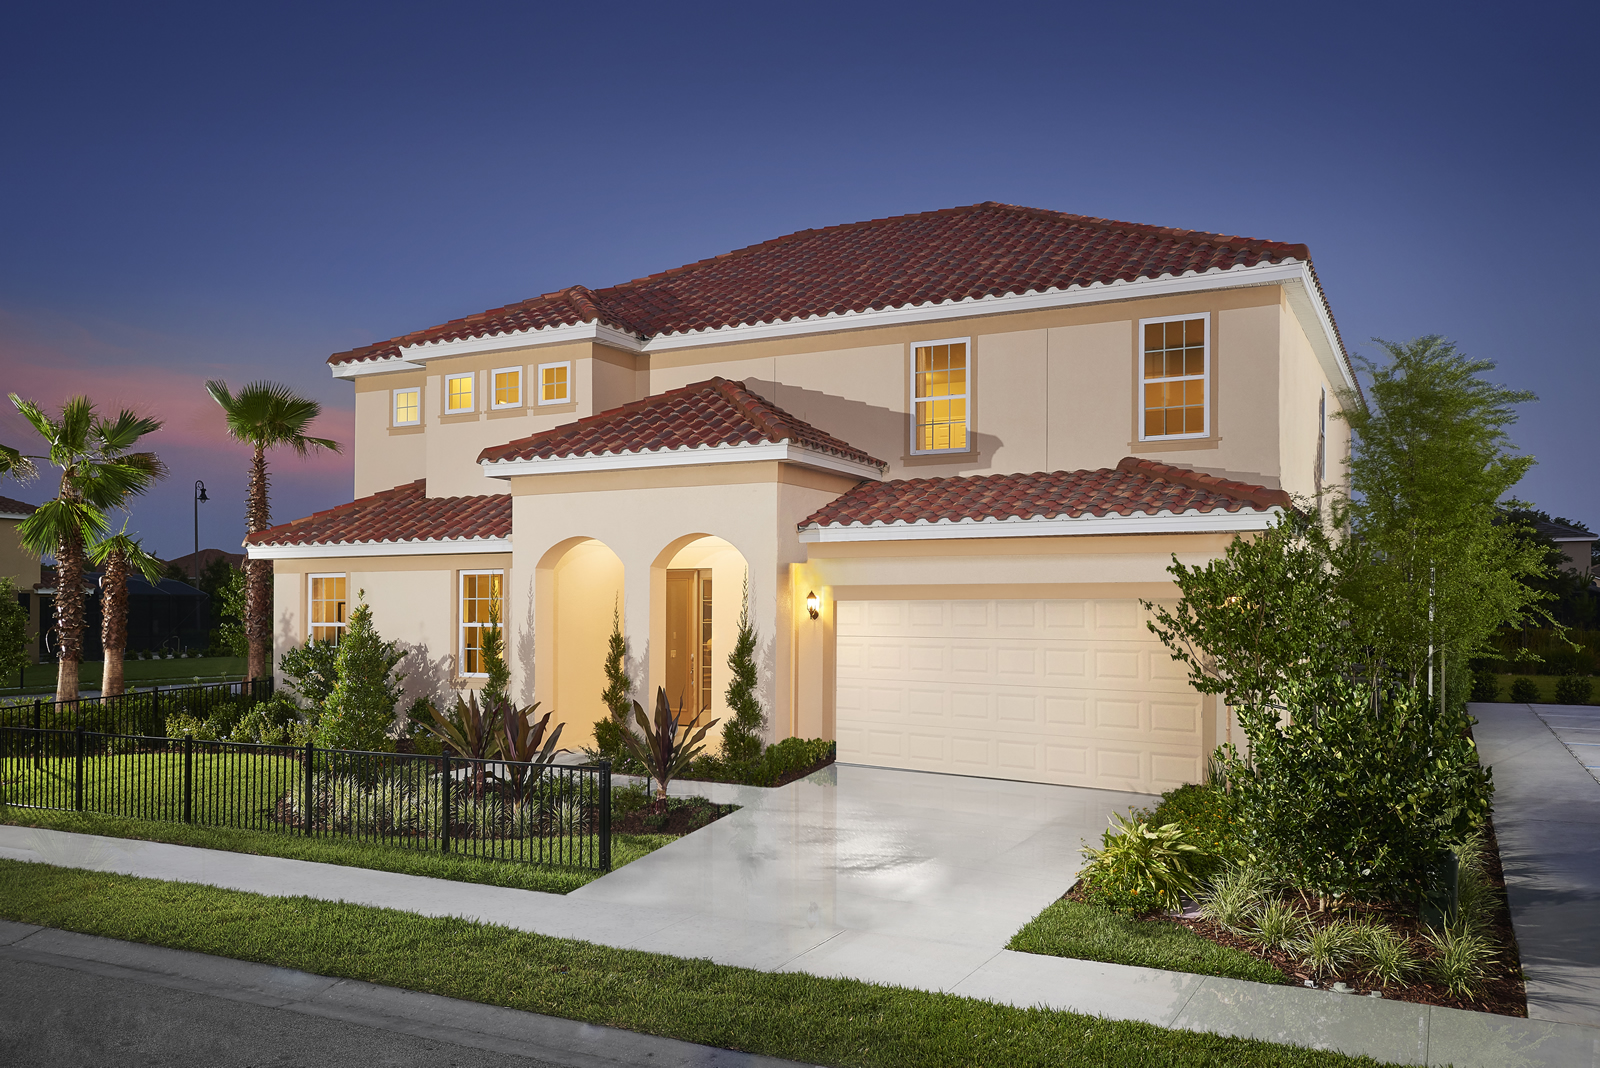 Vacation homes for sale in Orlando. New construction homes near Disney